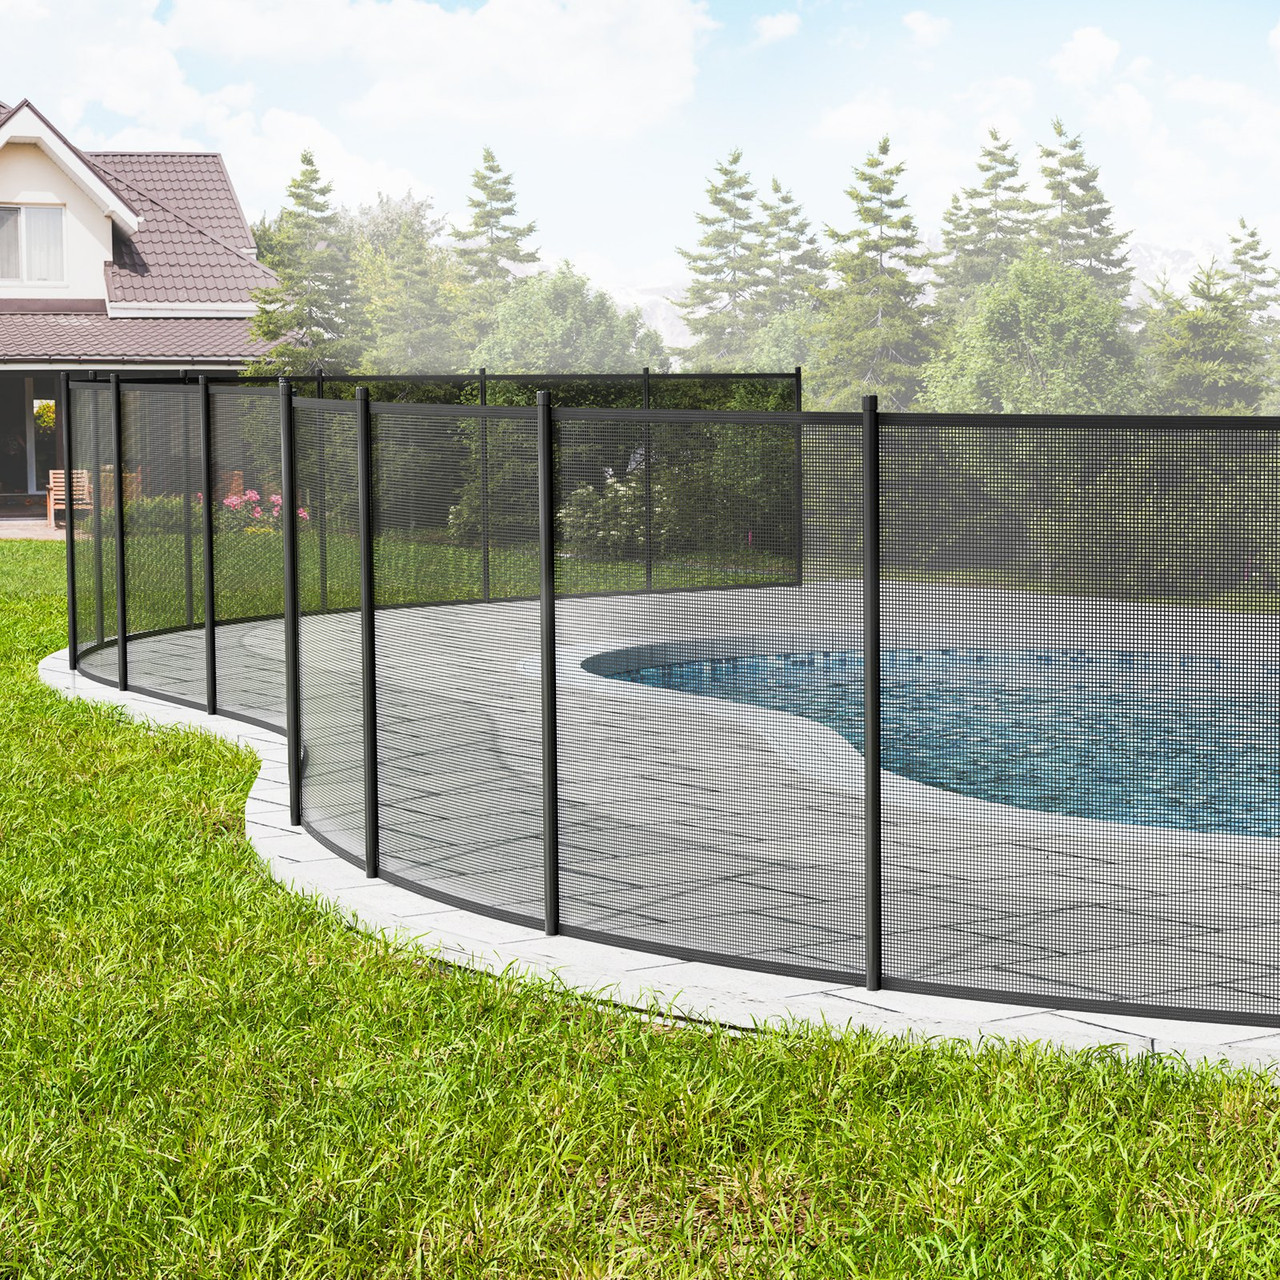 VEVOR Pool Fence, 4 x 12 FT Pool Fences for Inground Pools, Removable Child Safety Pool Fencing, Easy DIY Installation Swimming Pool Fence, 340gms Teslin PVC Pool Fence Mesh Protects Kids and Pets